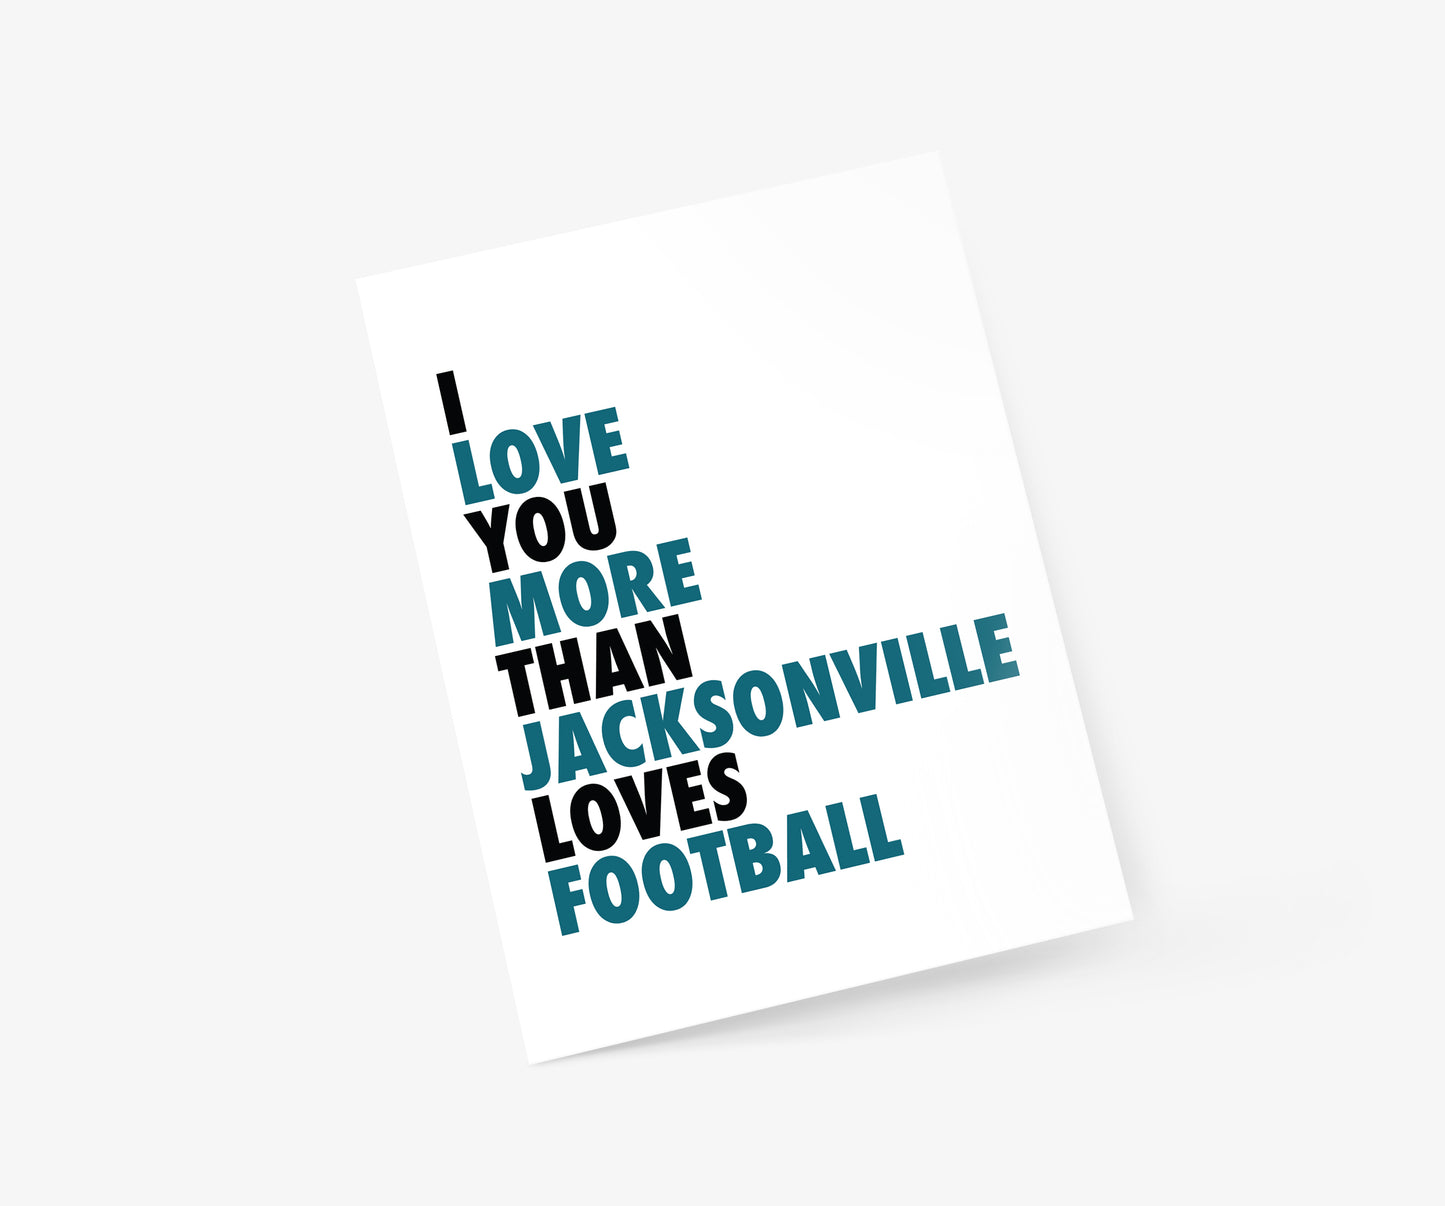 I Love You More Than Jacksonville Loves Football Everyday Card | Footnotes Paper